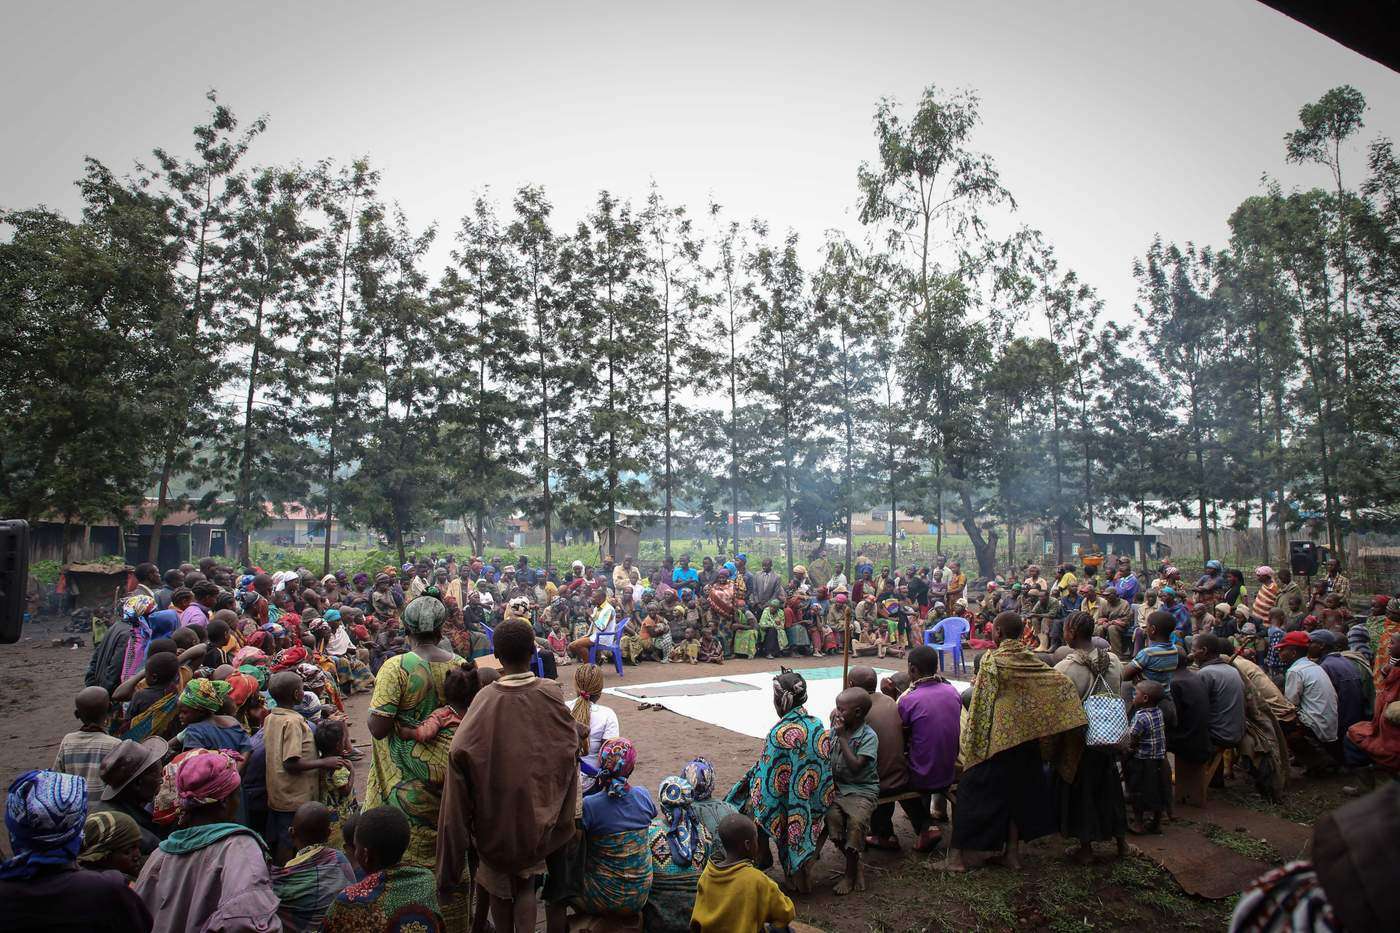 A rapt audience watches the play put on by MSF mental health counsellors and health promoters in the grounds of Mweso school, which is now a camp for displaced people. © Sara Creta\/MSF